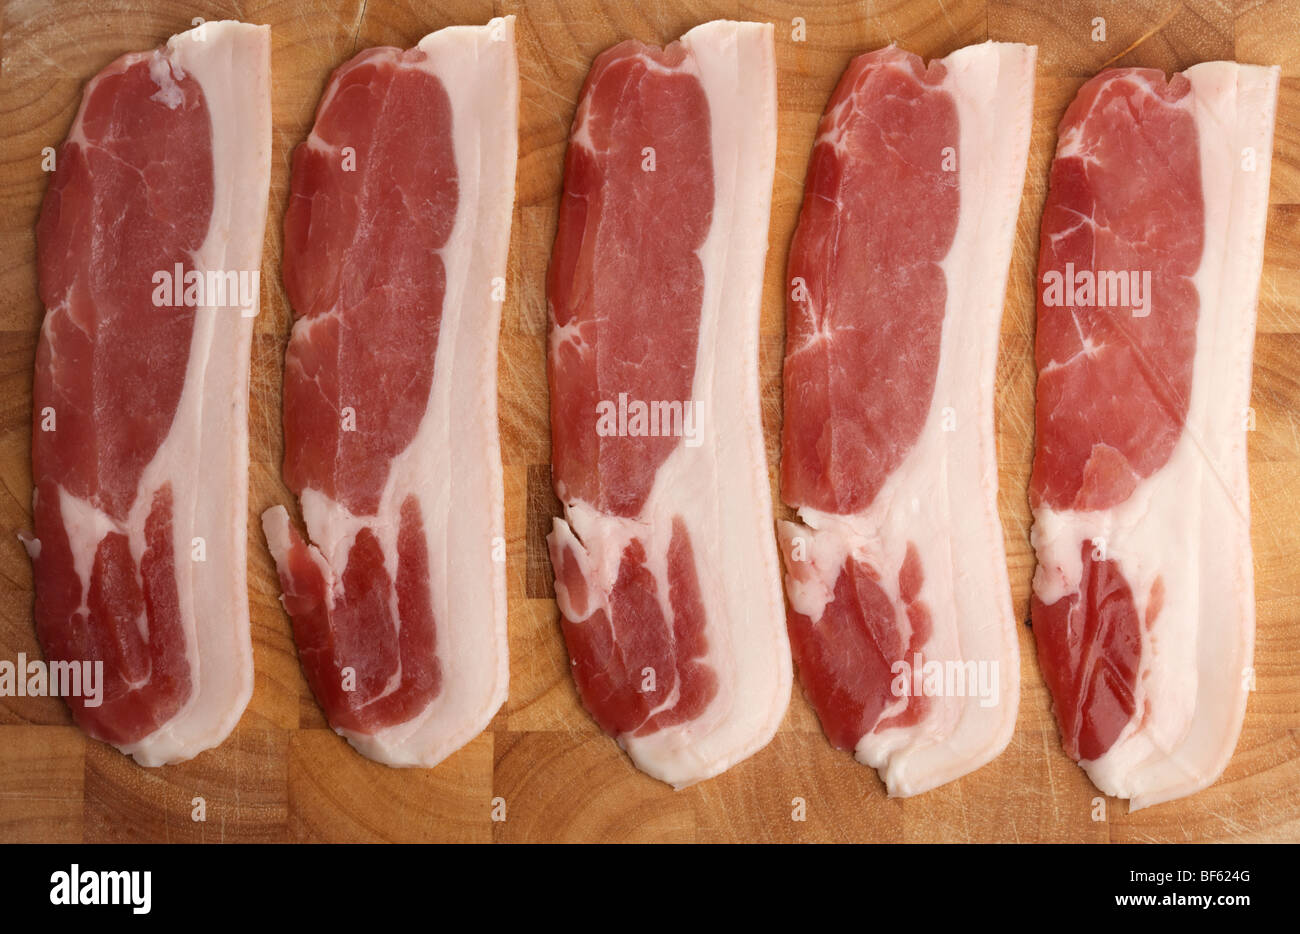 five strips of raw back bacon from organic british saddleback pigs reared in ireland laid out on a wooden butchers block Stock Photo